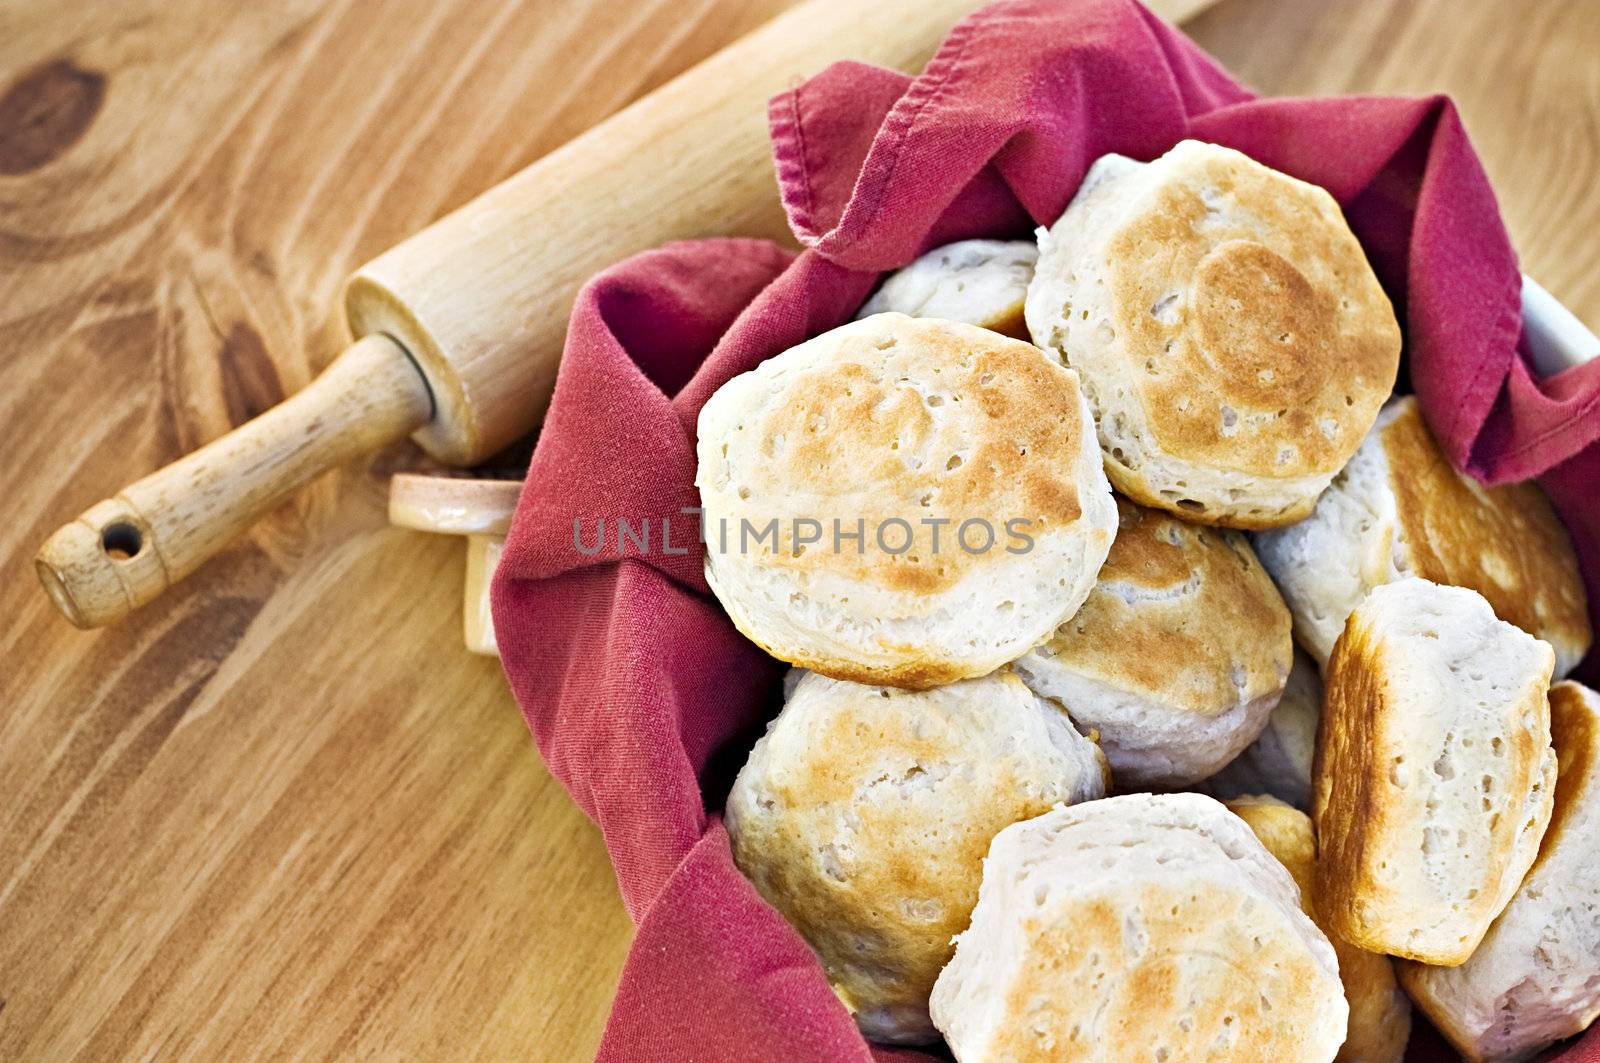 Homemade buttermilk biscuits and rolling pin